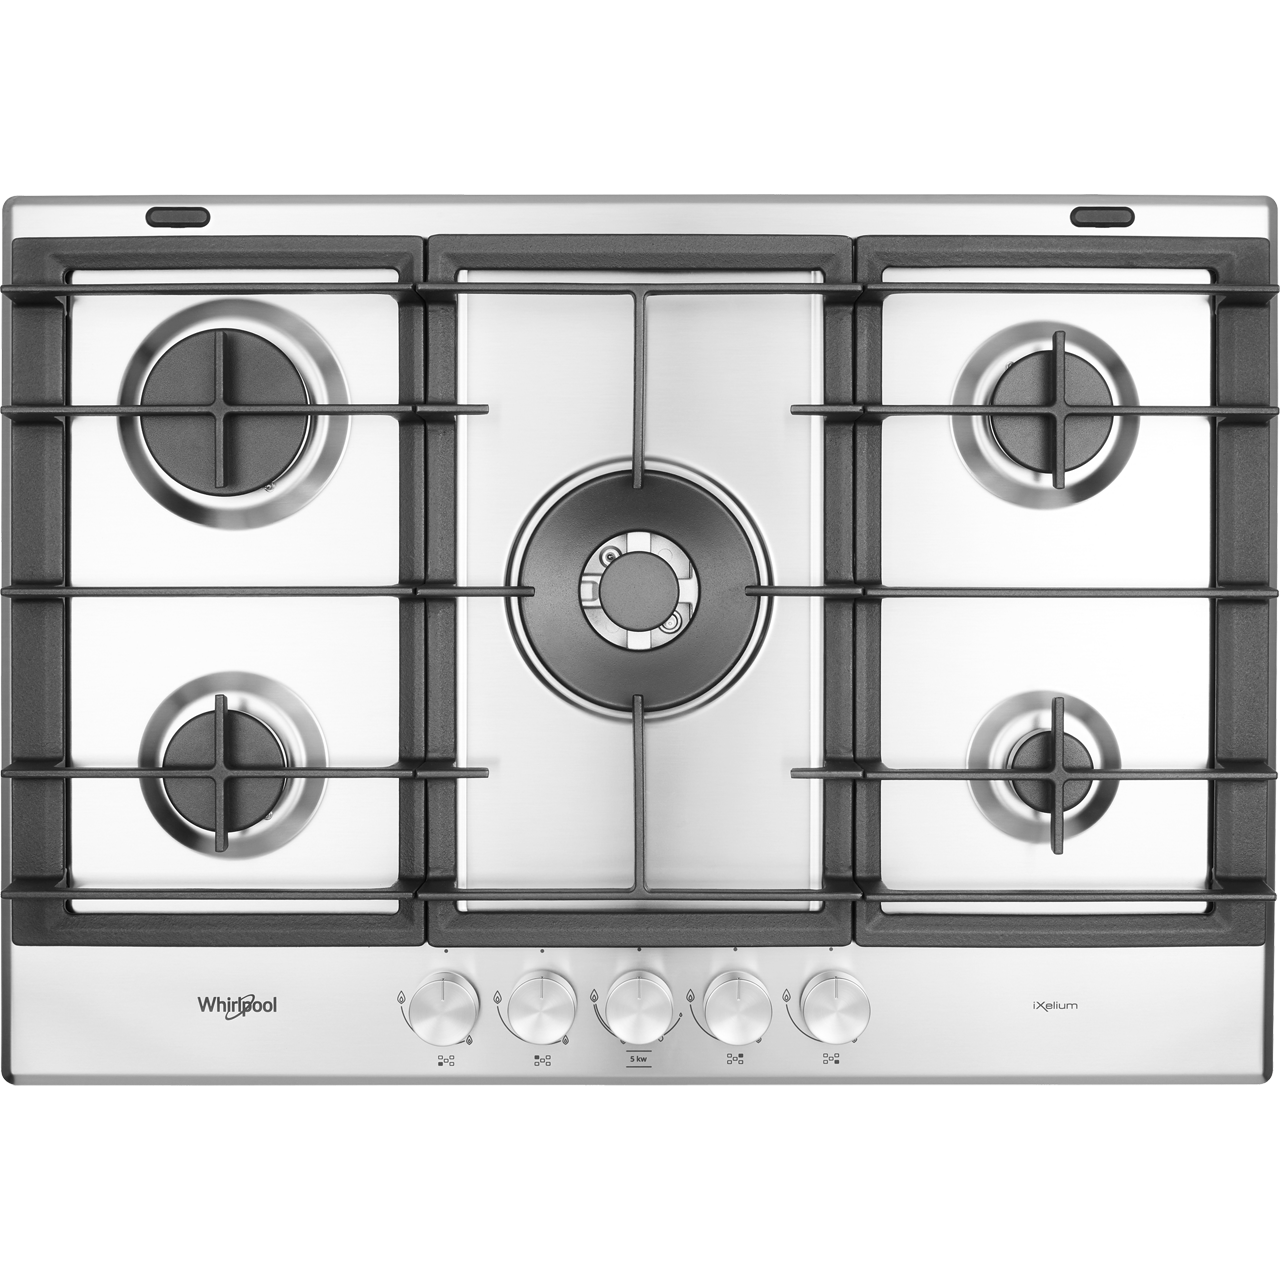 Whirlpool W Collection GMW7552/IXL 73cm Gas Hob Review